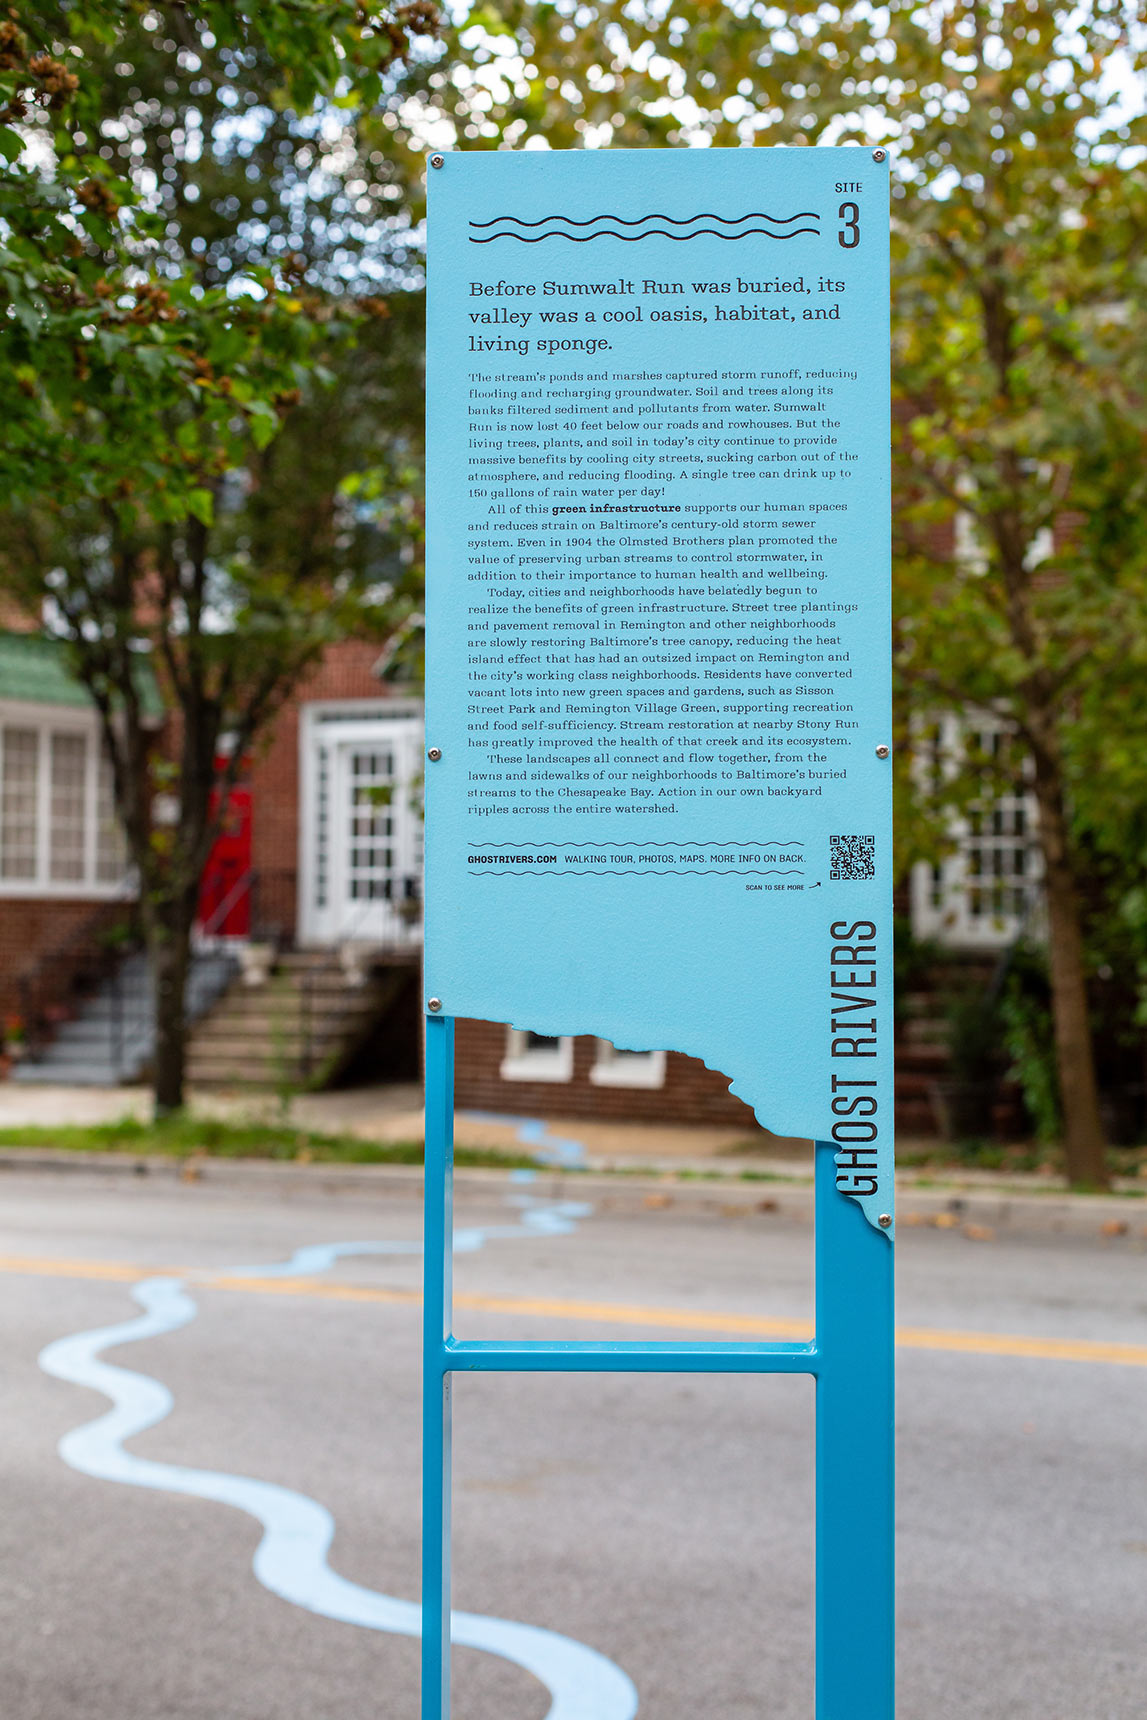 A photo of a tall blue interpretive sign, with the form of a river cut out from the bottom of the sign panel. Through the gap in the sign, a bright blue wavy line snakes across the street, with Baltimore rowhouses visible in the background.